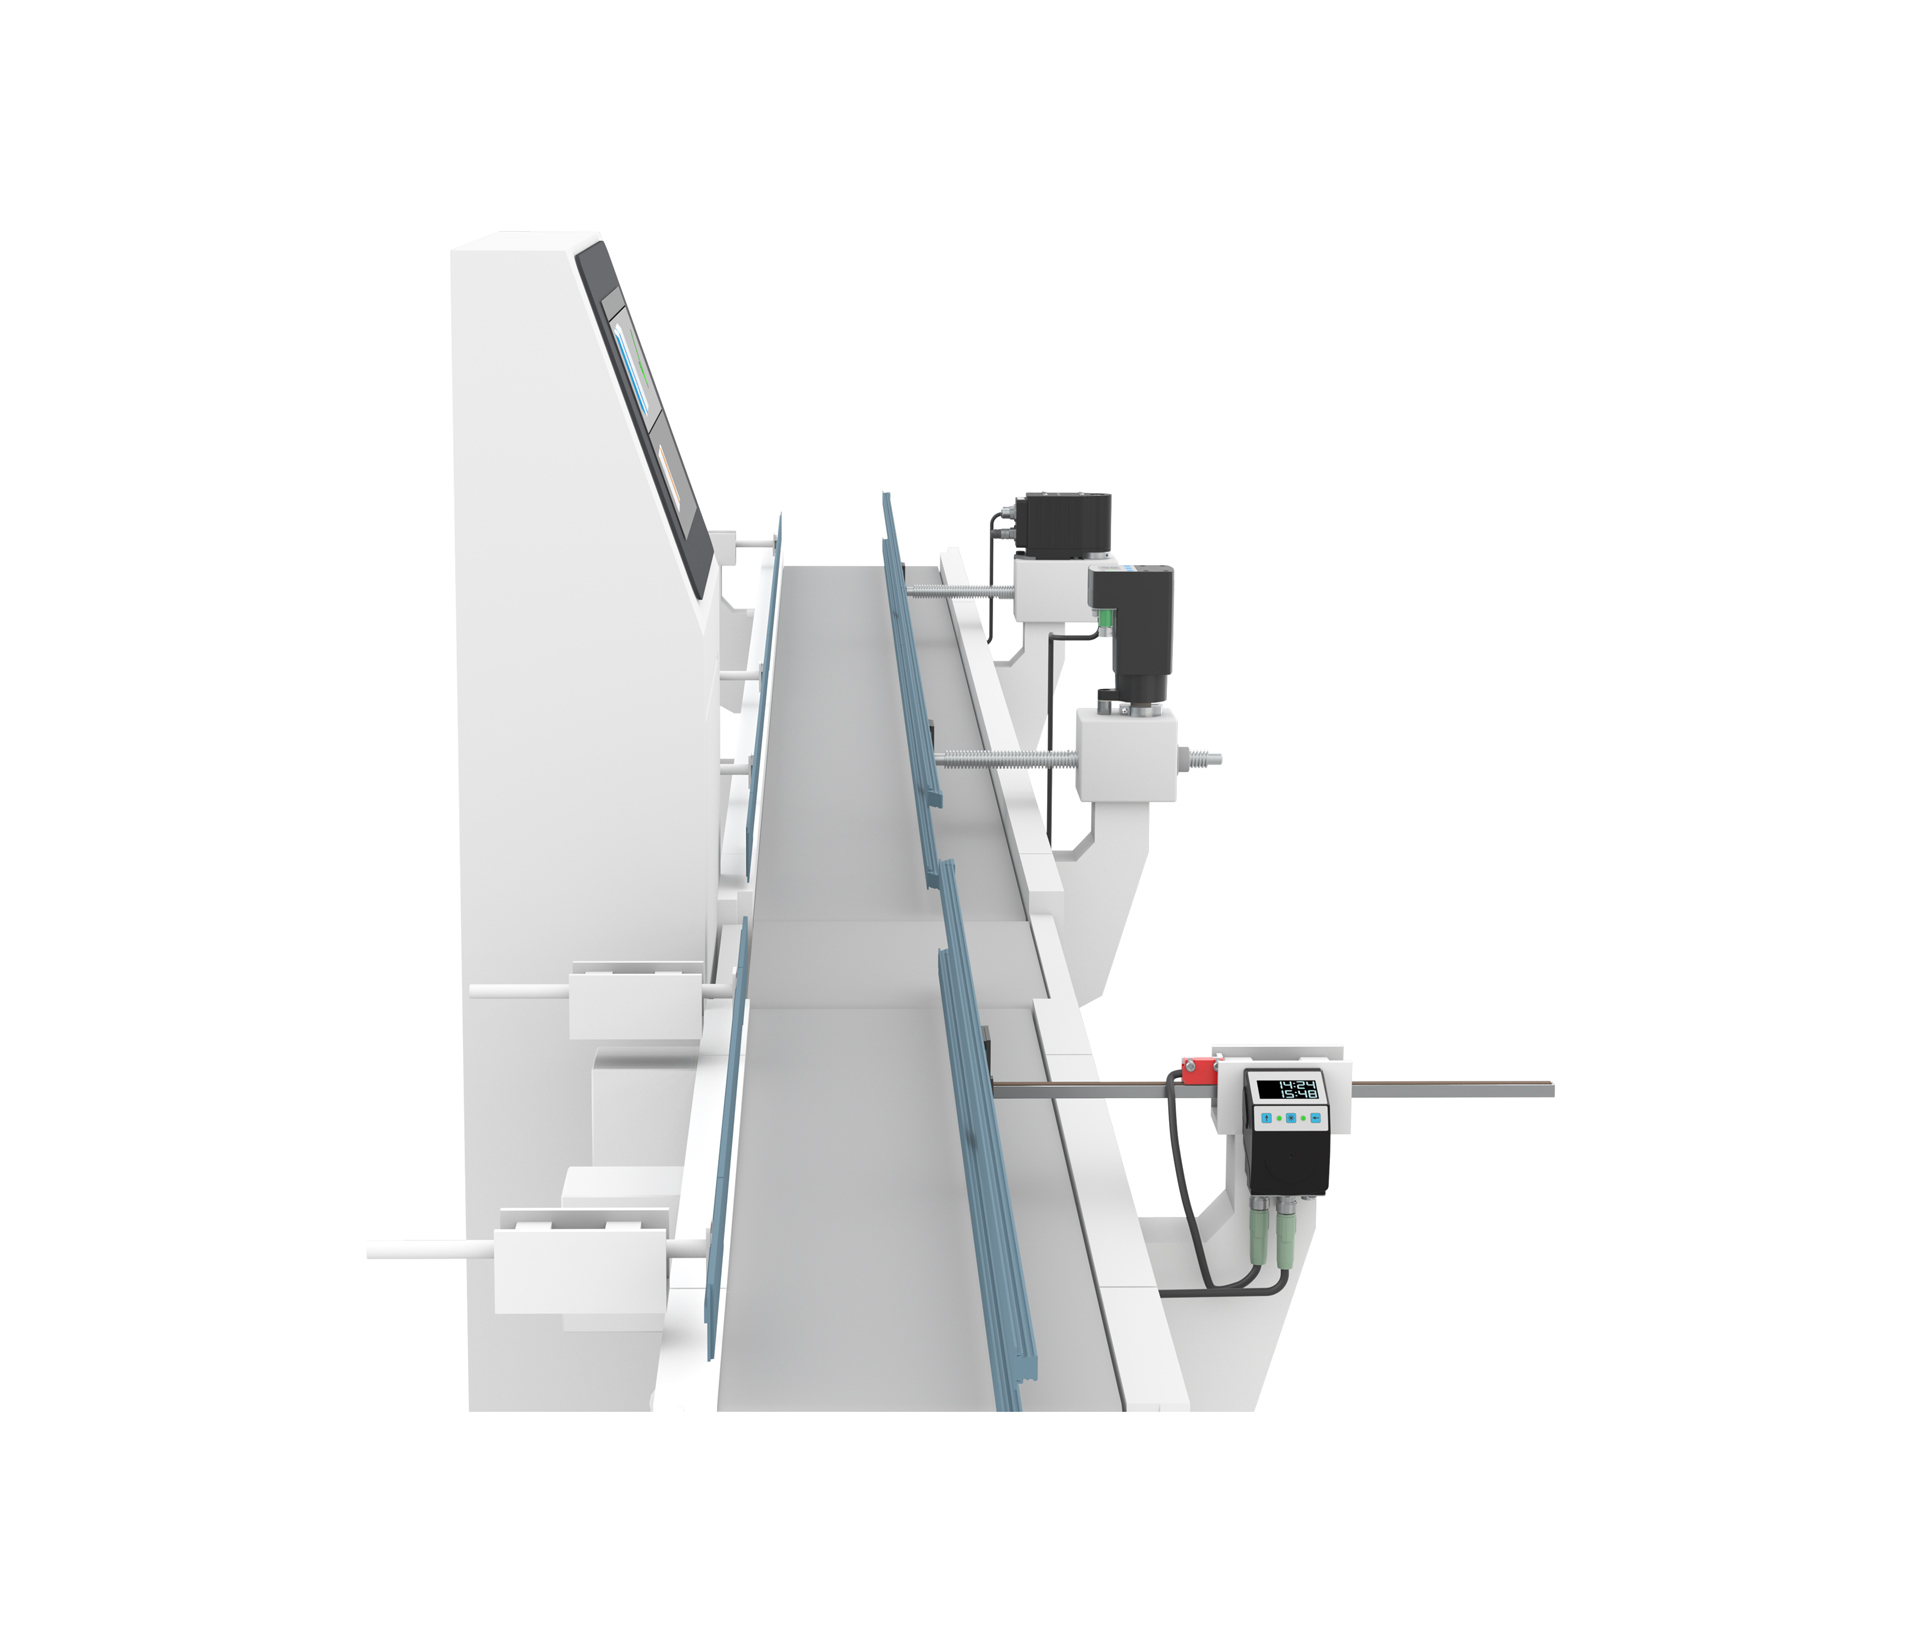 SIKO positioning systems for side guides and conveyor belts